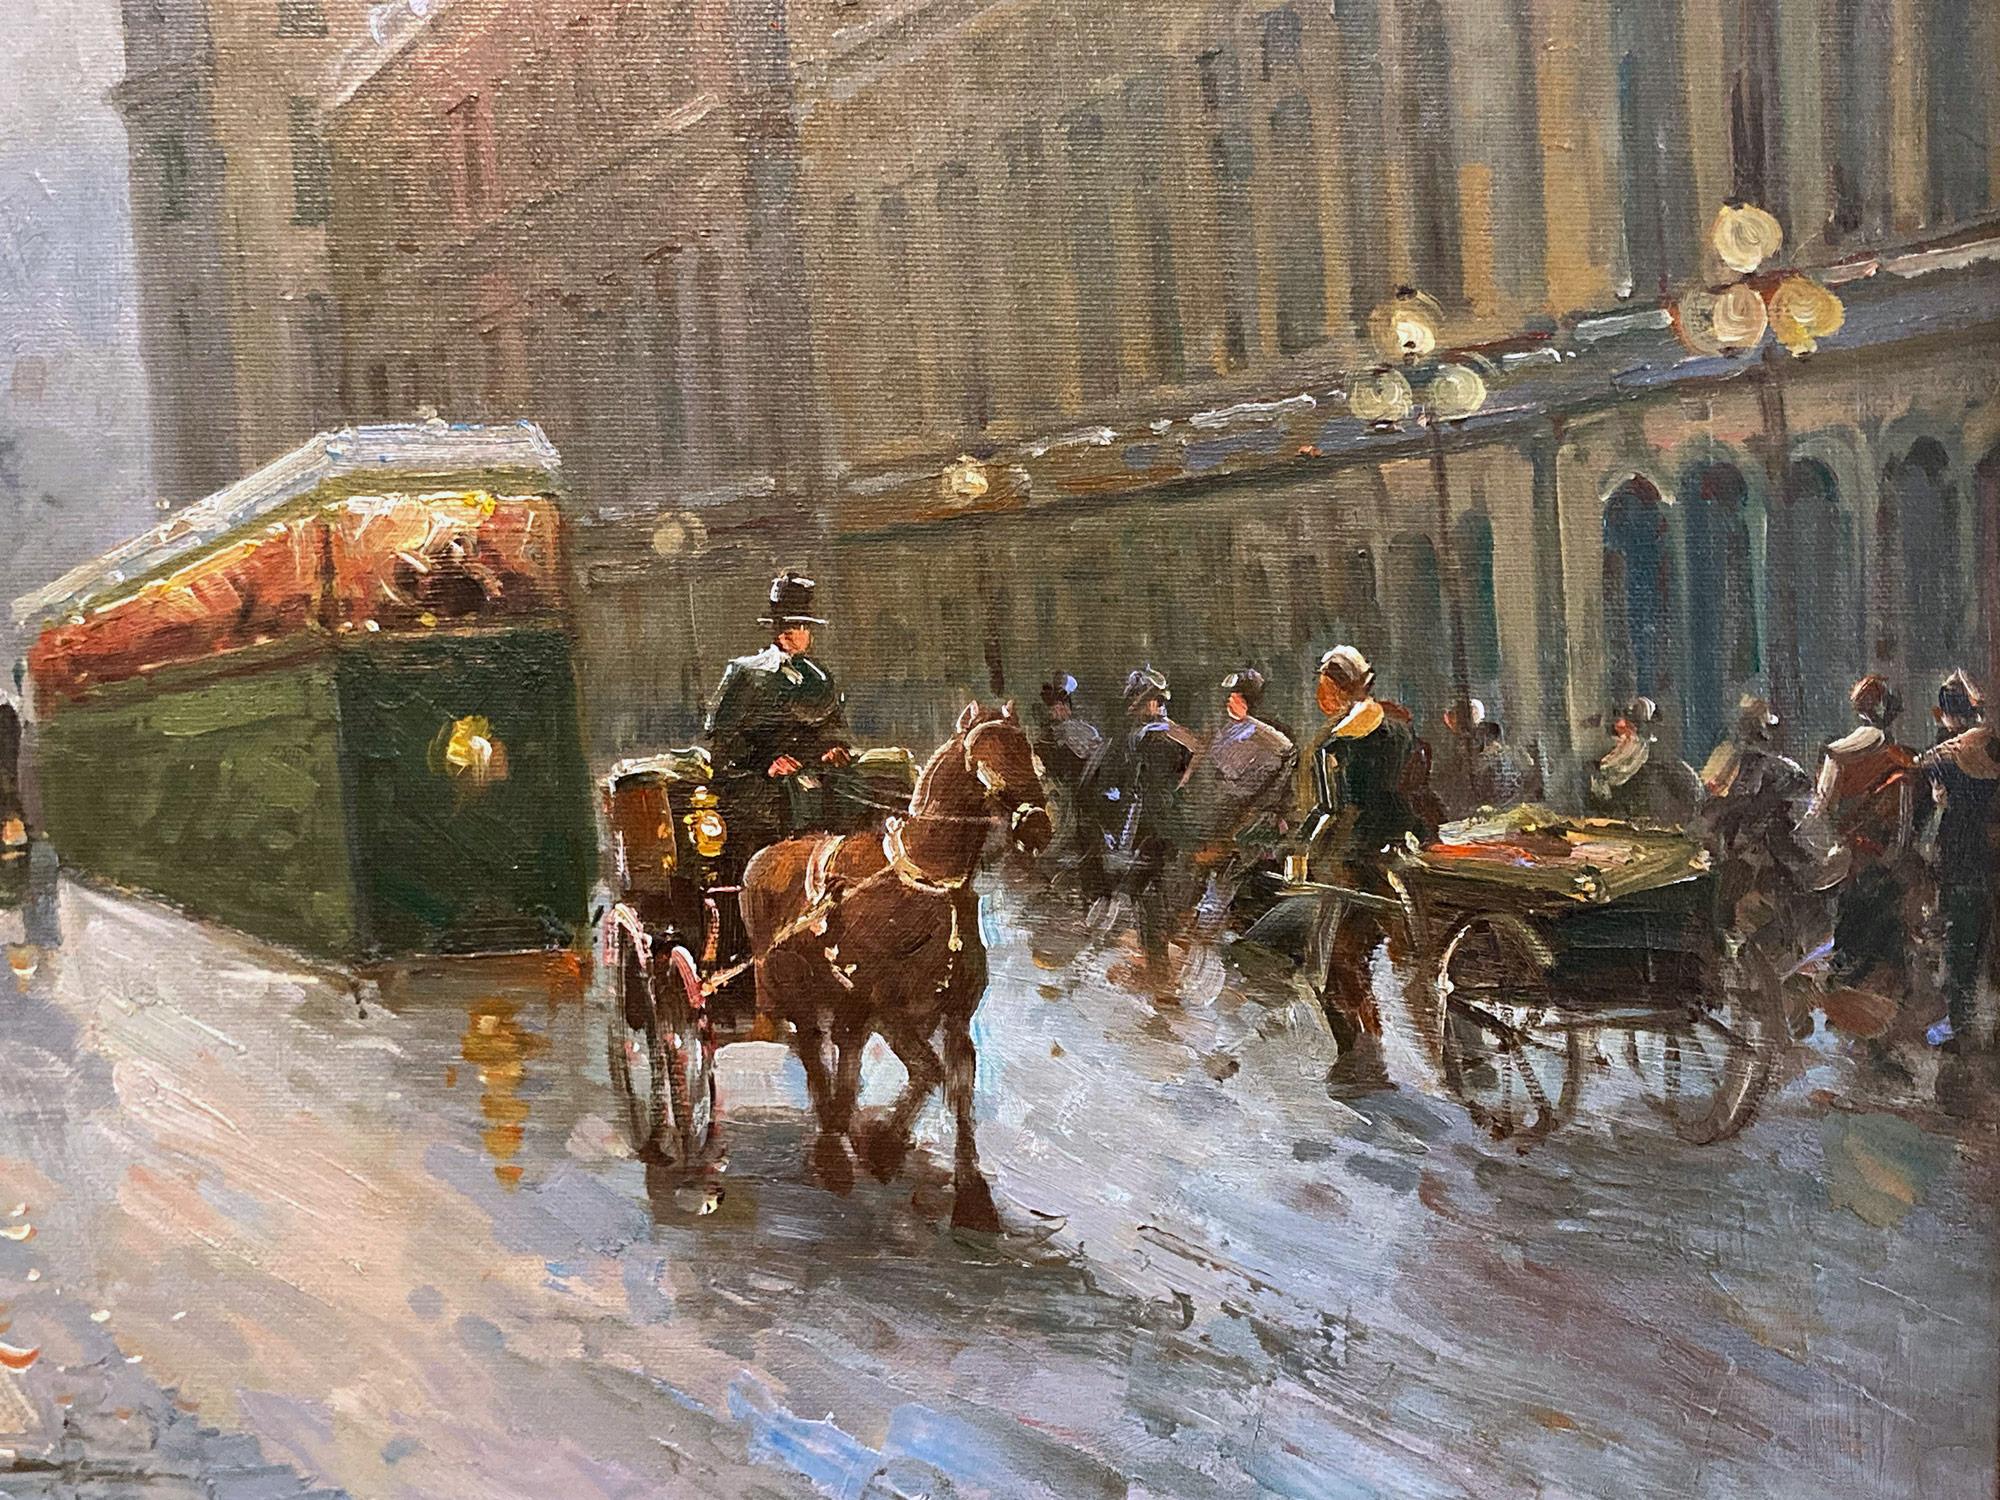 A beautiful oil on canvas painting by the French artist, Te Pencke. Pencke was a Parisian painter known for his colorful cityscapes depicting the times of his generation. His work is comparable to those of Jules Herve, Antoine Blanchard and Edouard